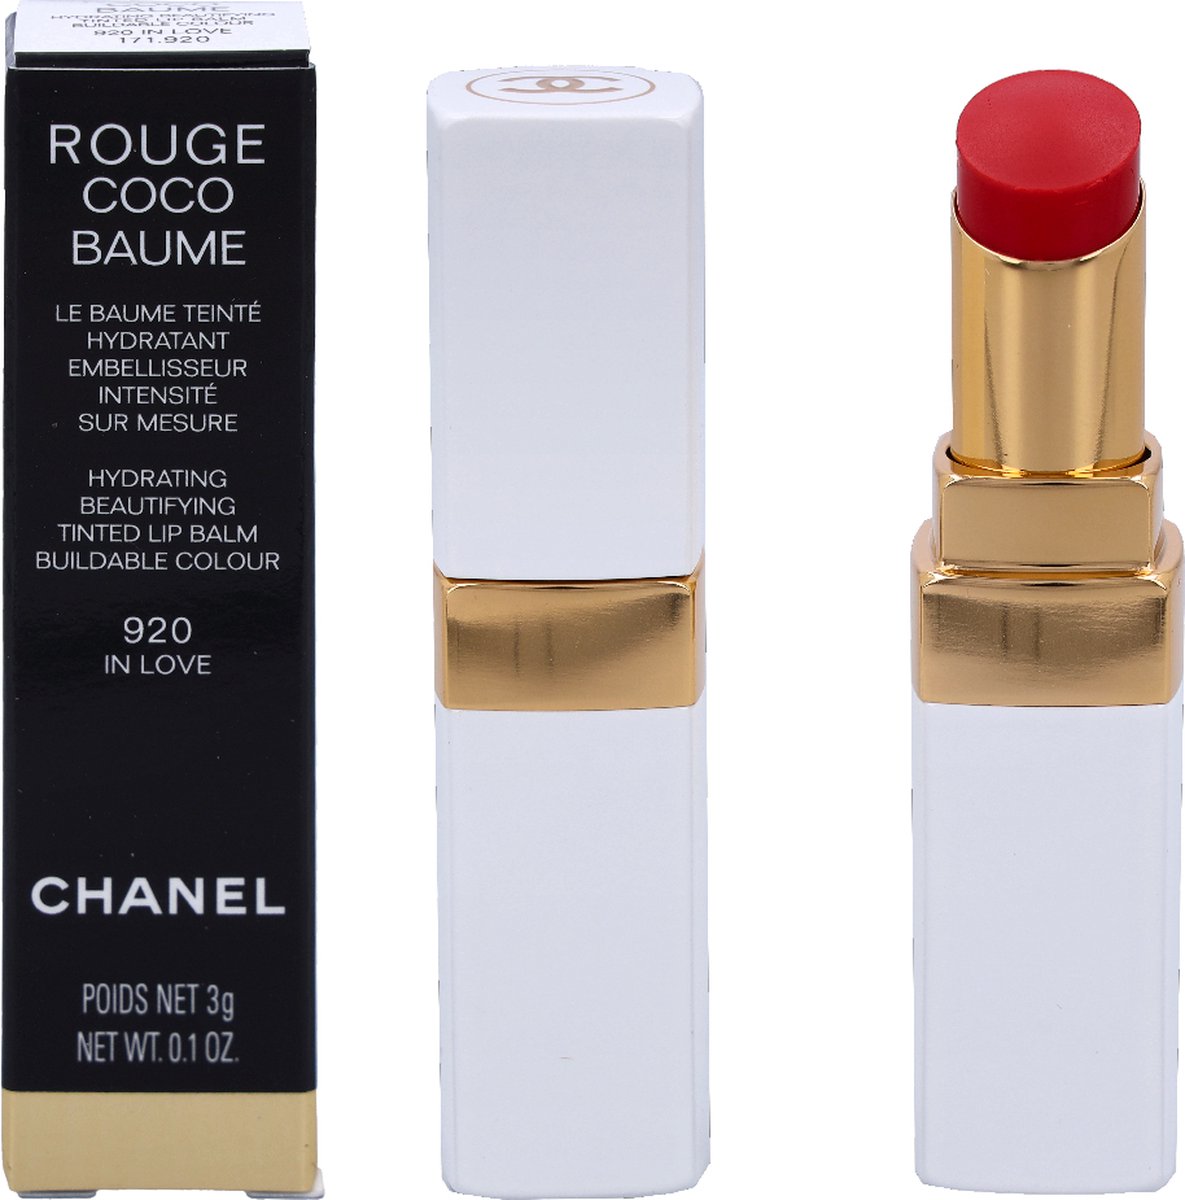 CHANEL+Rouge+Coco+Baume+916+Flirty+Coral+Hydrating+Tinted+Lip+Balm+3g. for  sale online